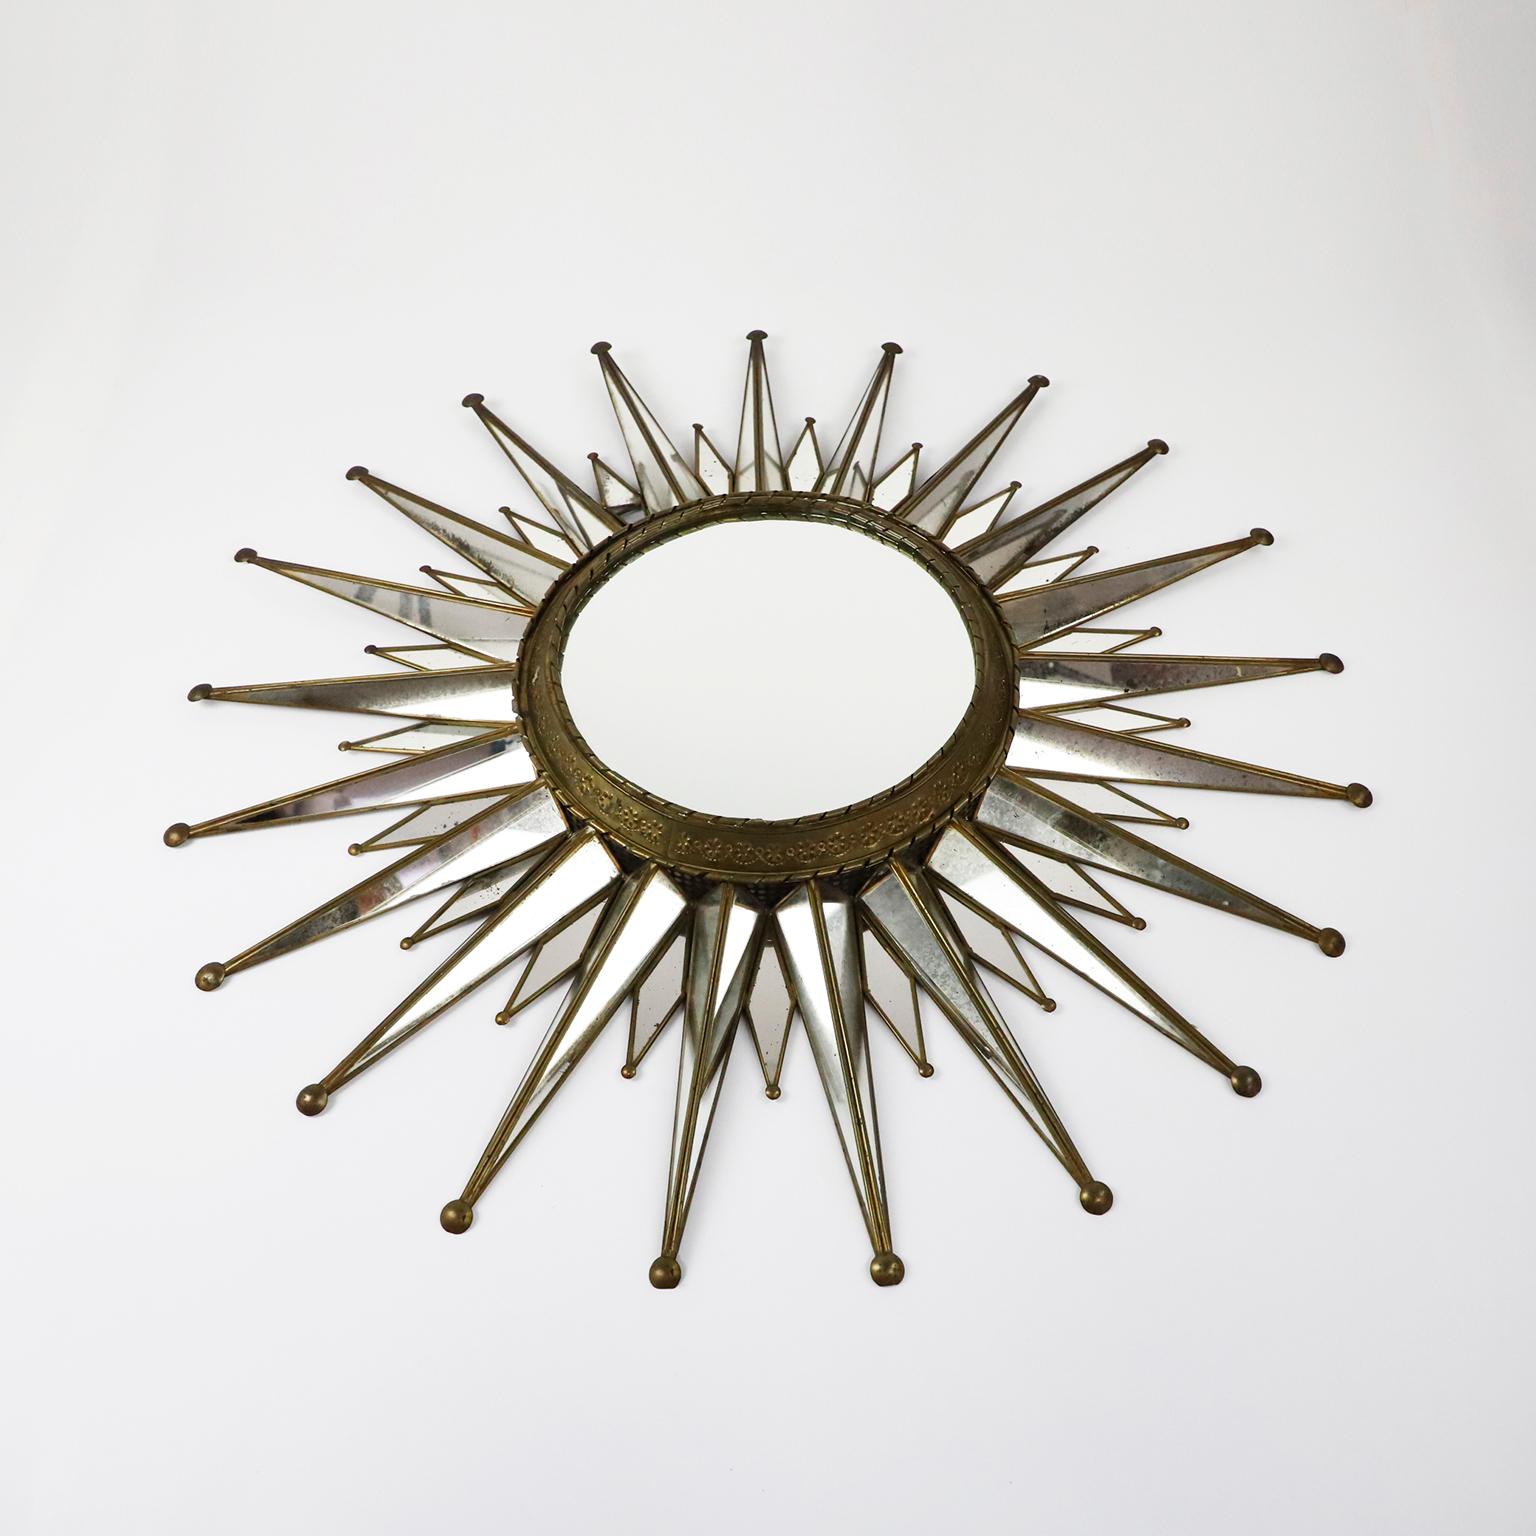 Circa 1950, we offer this big size mexican artisanal sunburst mirror. Made in steel, bass details and fantastic patina.